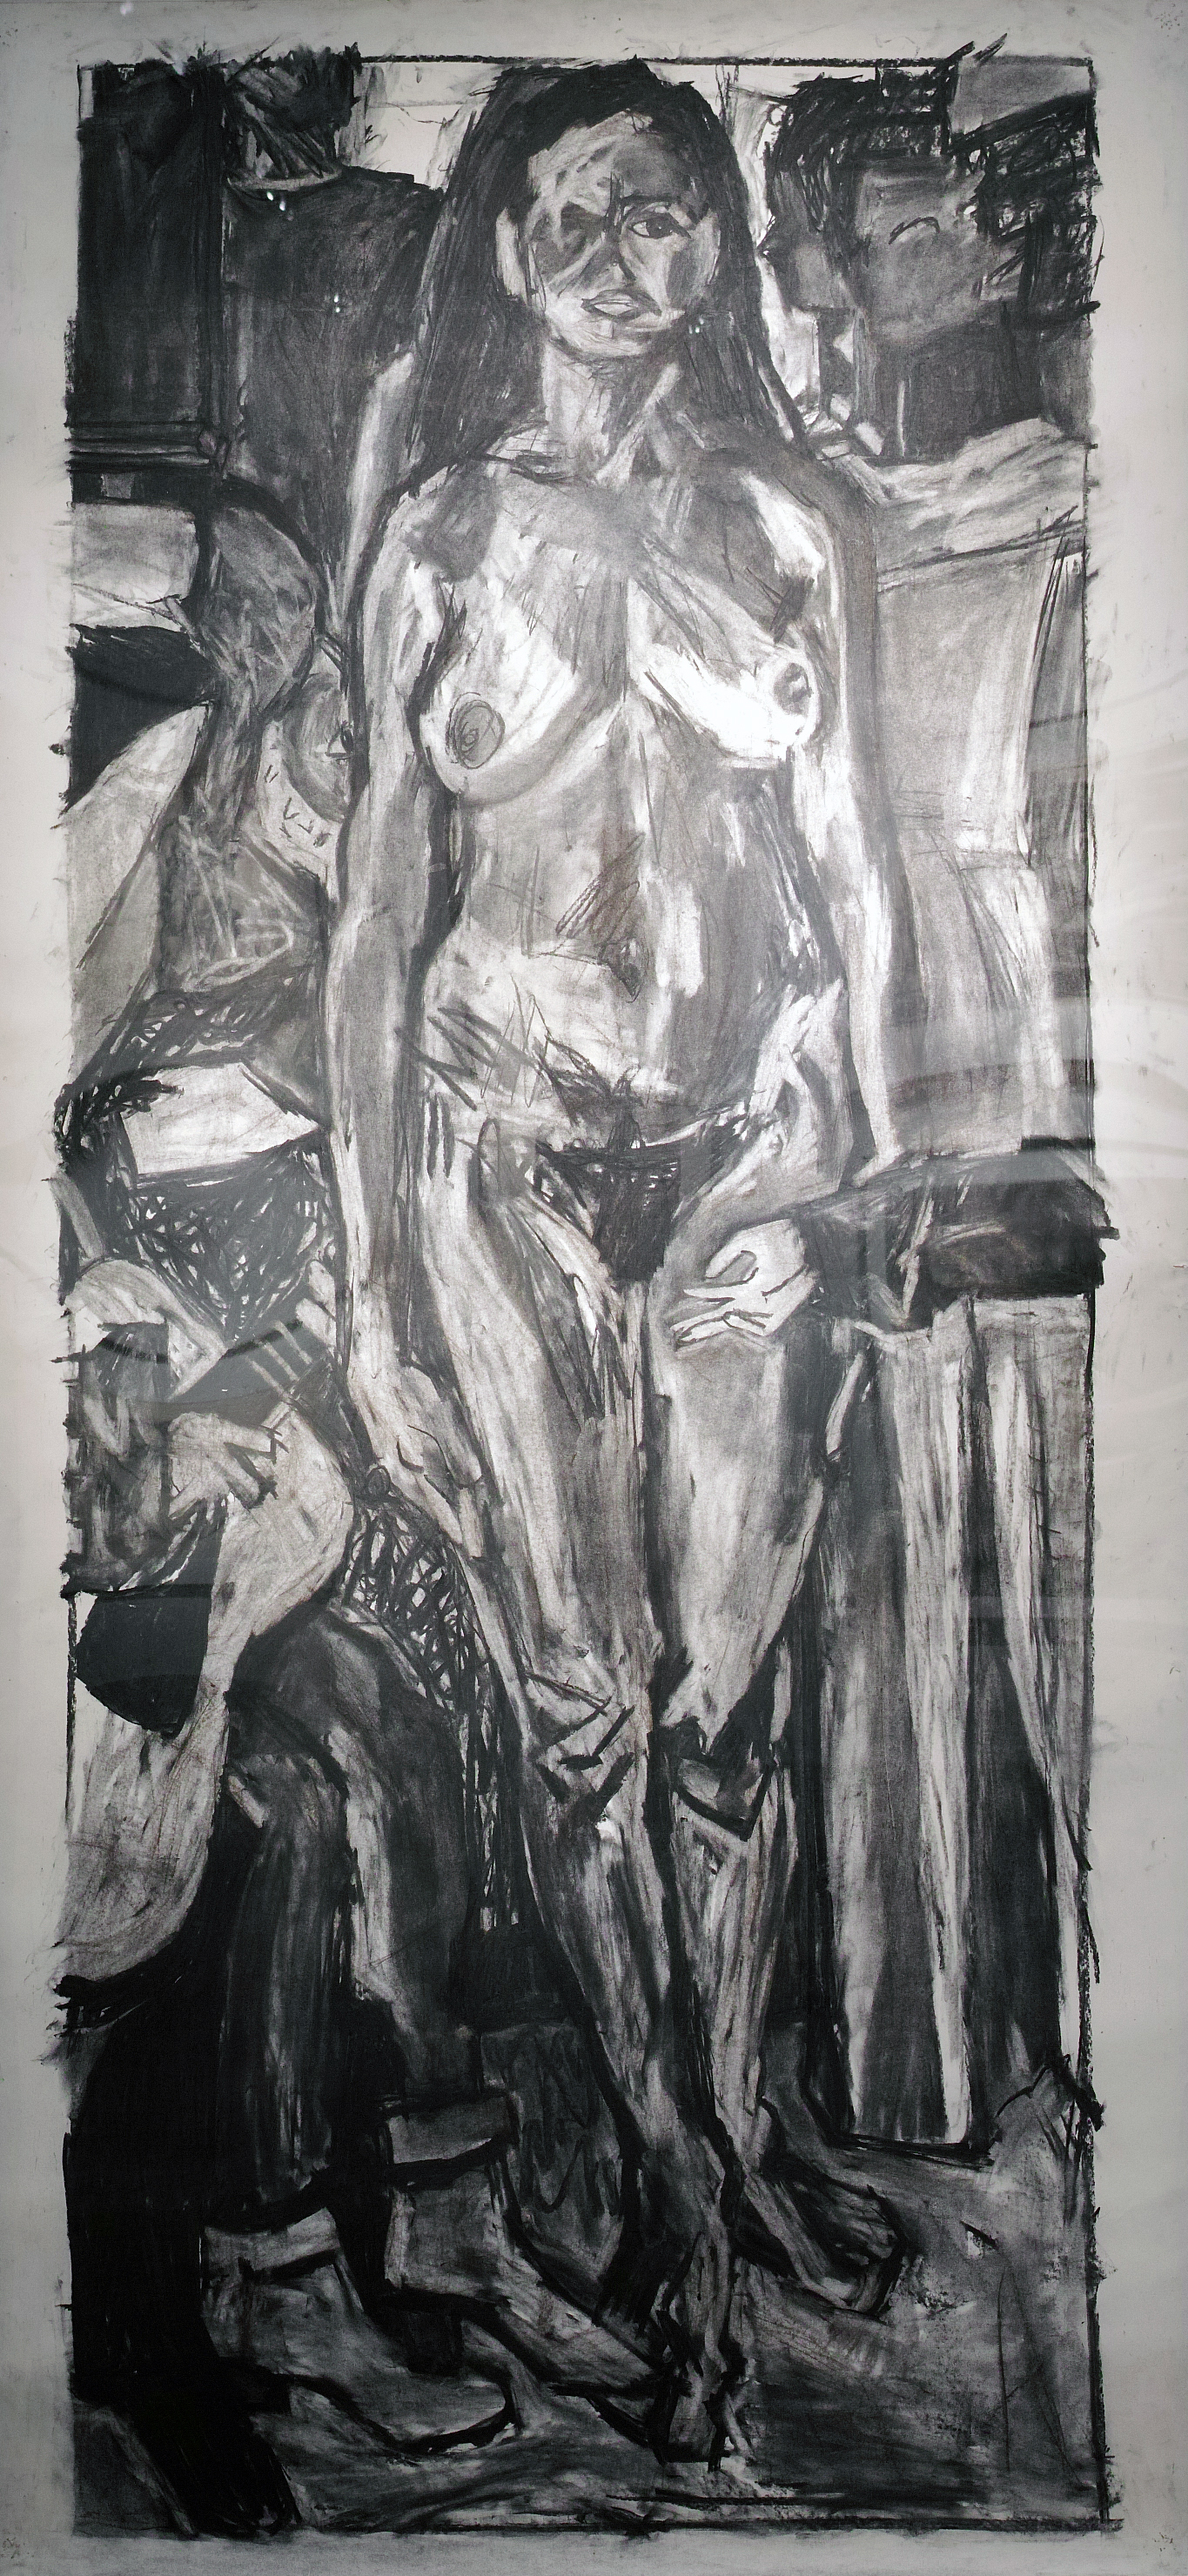 After Watteau, 1991, charcoal on paper, 75 x 37 inches